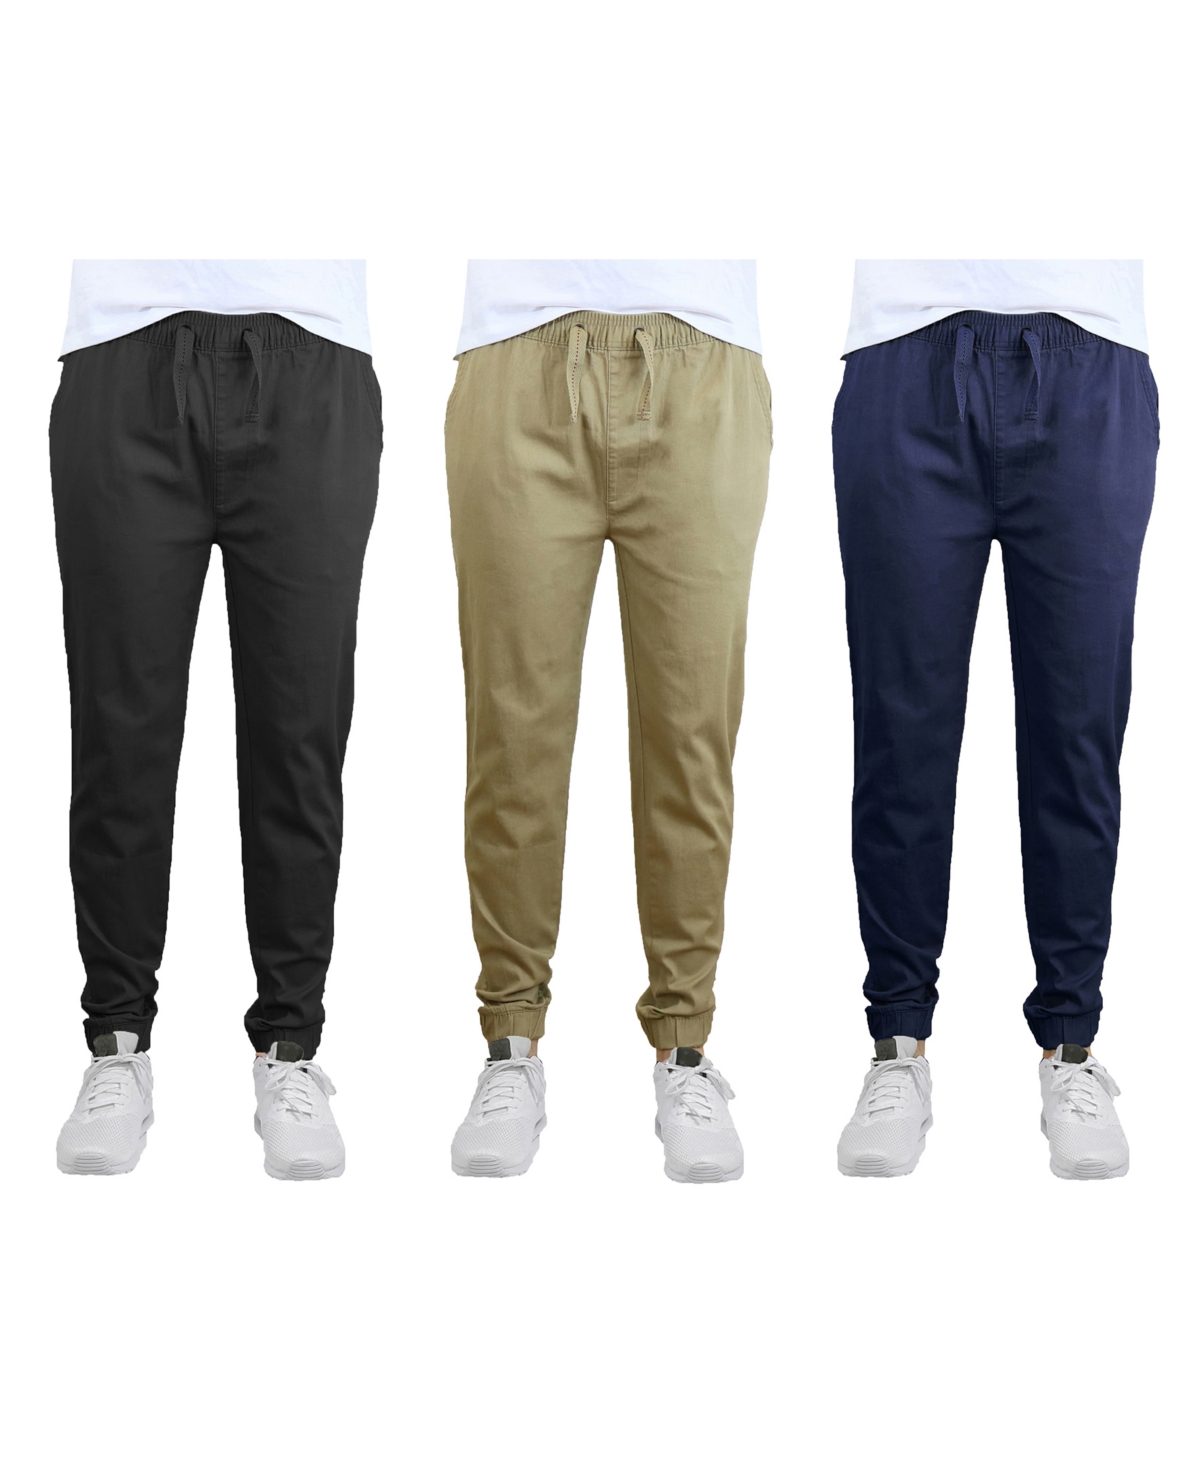 Galaxy By Harvic Men's Slim Fit Basic Stretch Twill Joggers, Pack Of 3 In Black,khaki And Navy